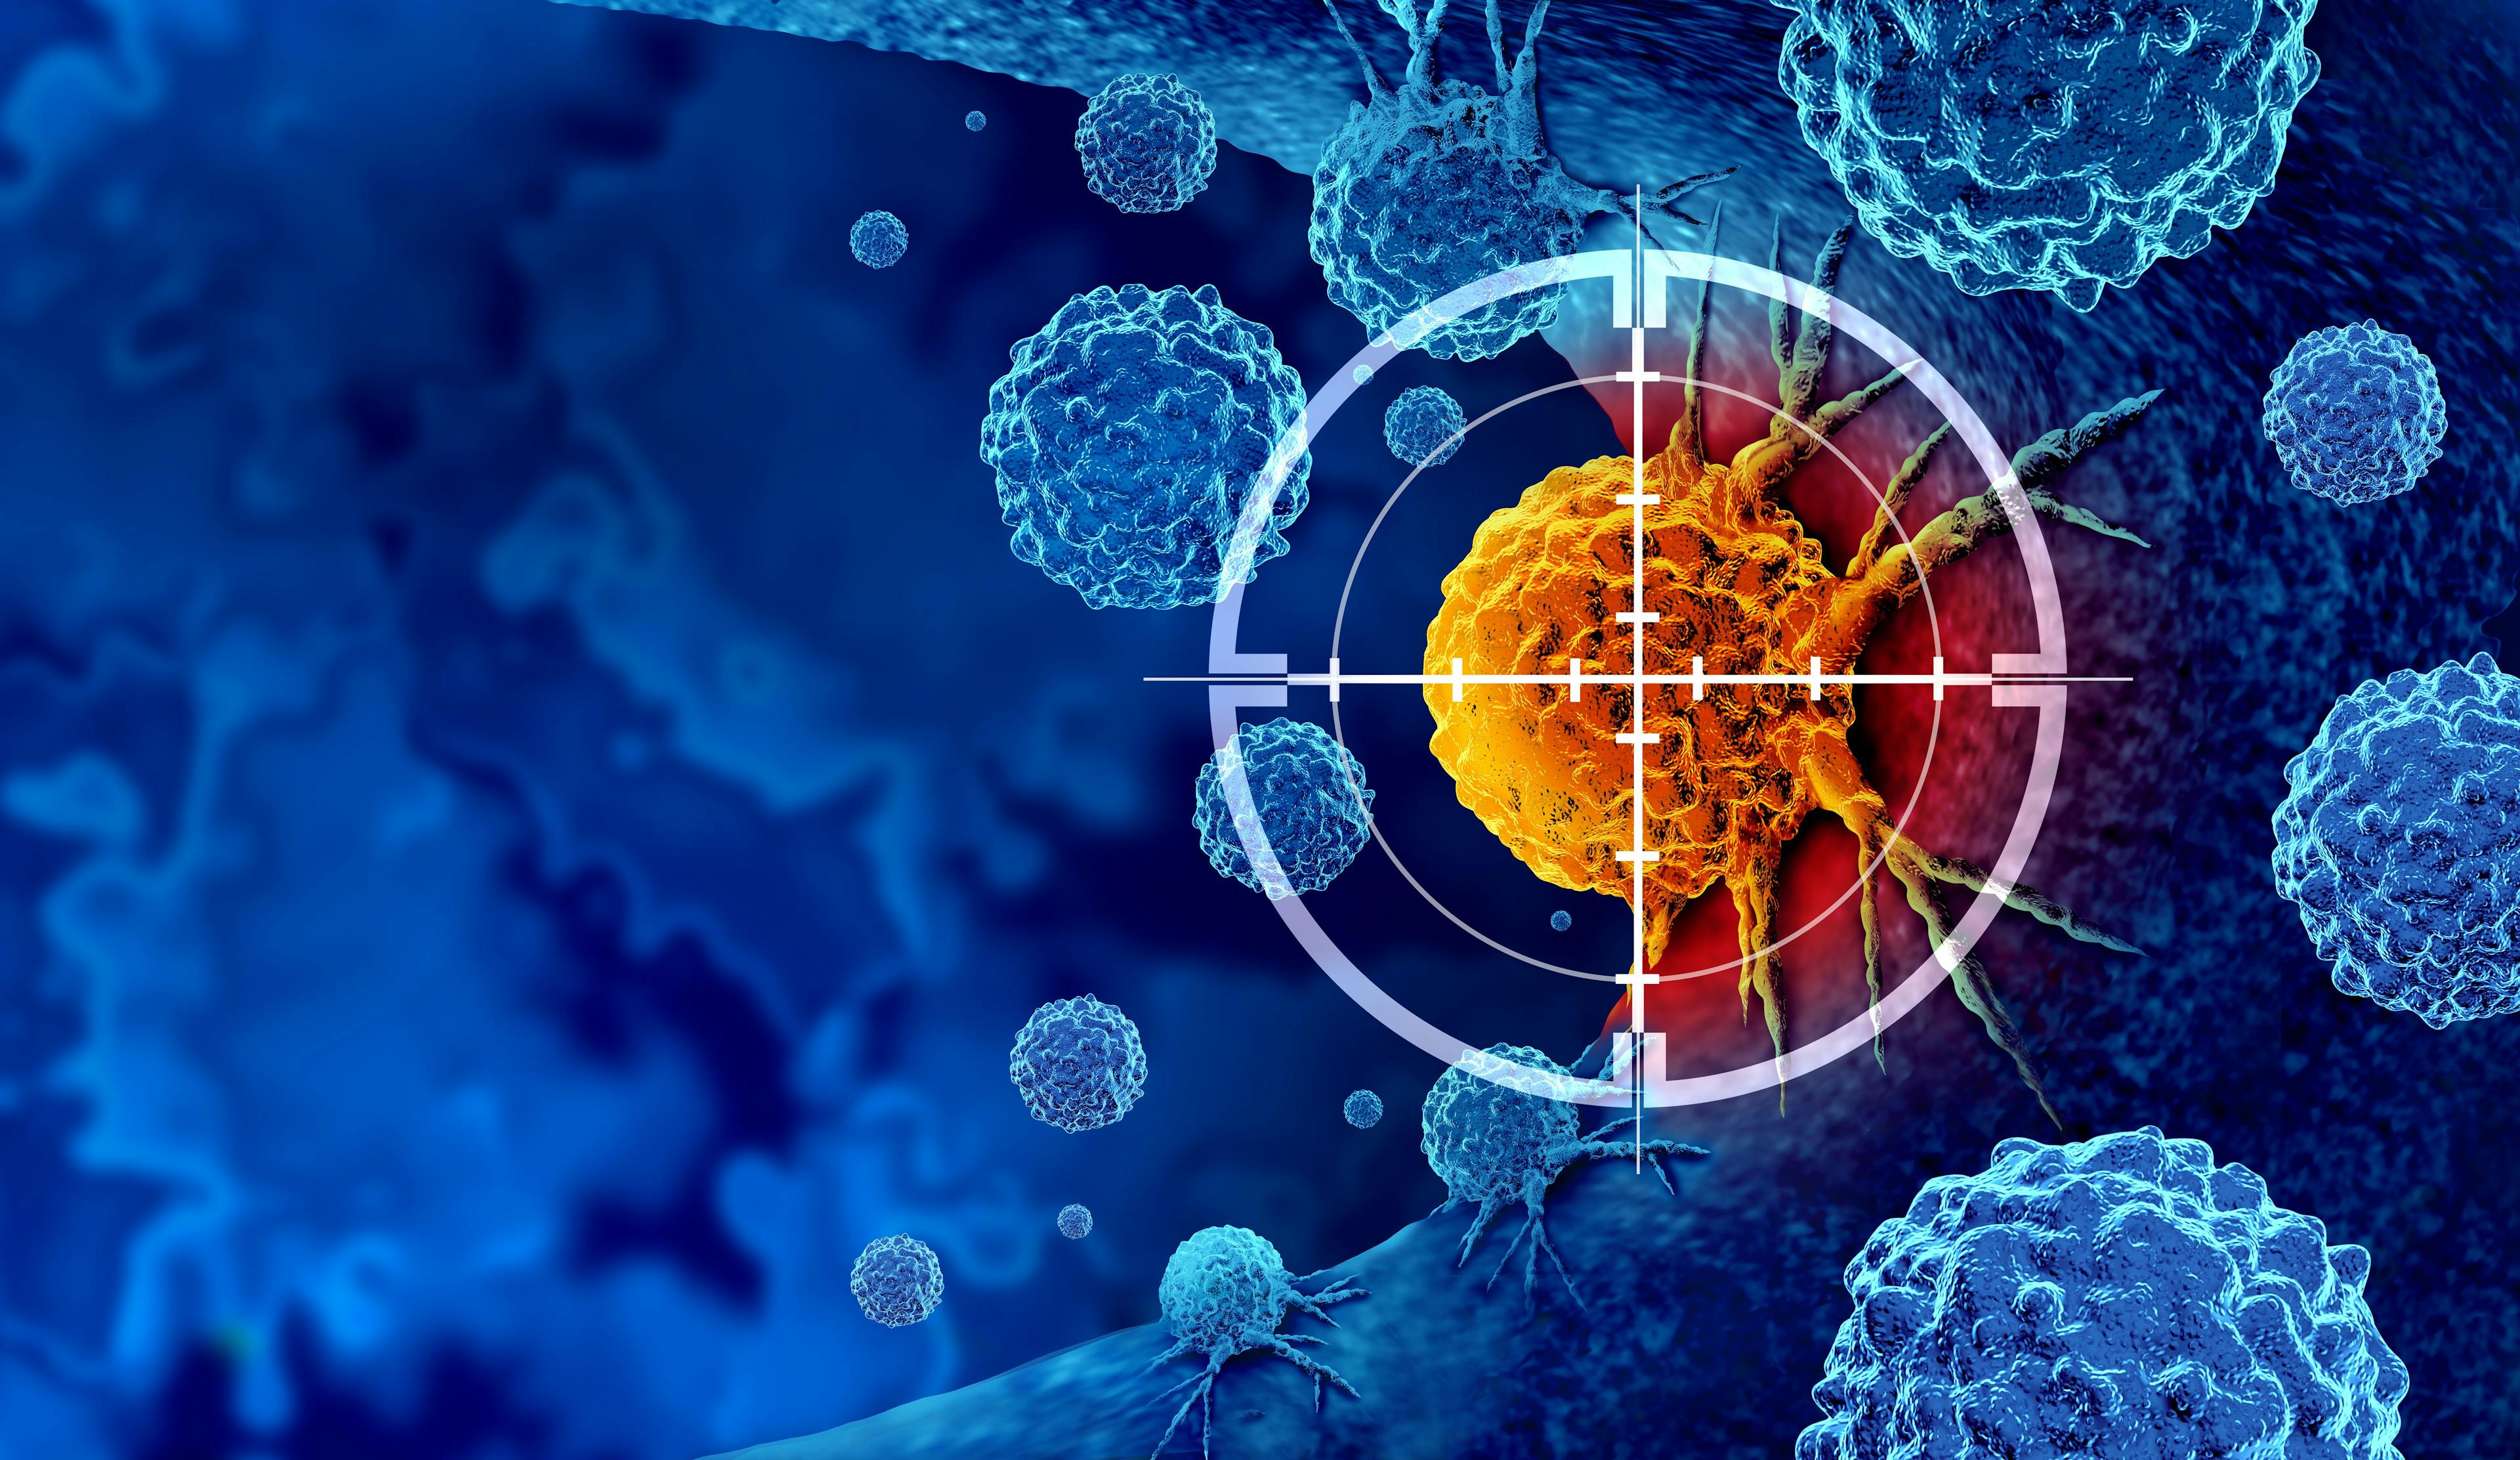 Cancer detection and screening as a treatment for malignant cells with a biopsy or testing caused by carcinogens and genetics with a cancerous cell as an immunotherapy symbol | Image credit: © freshidea - © stock.adobe.com